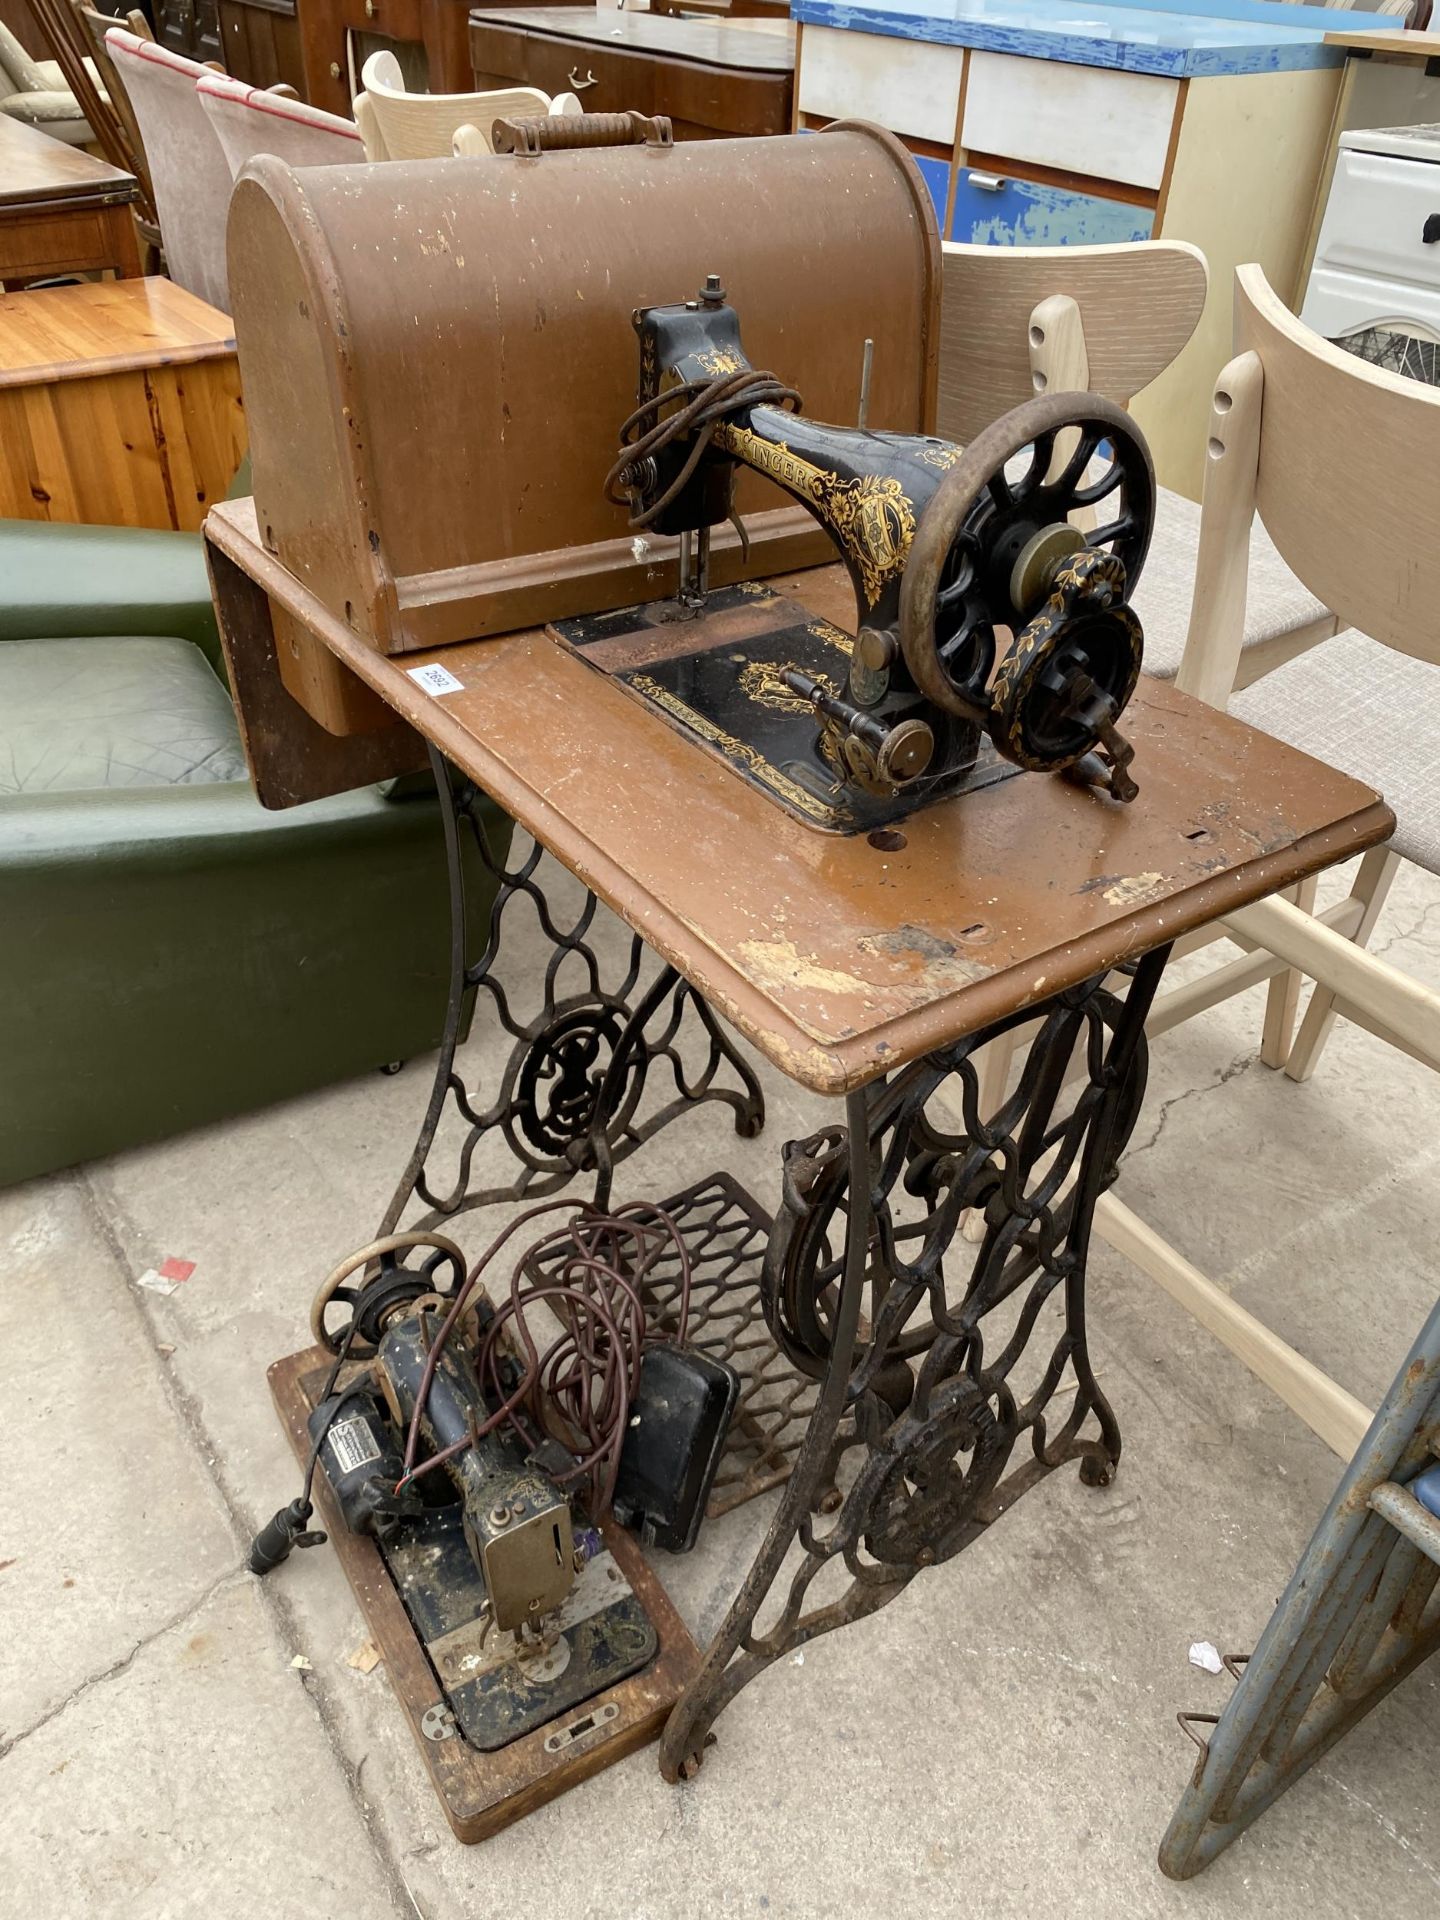 A SINGER TREADLE SEWING MACHINE, NUMBER R604055 AND MUNDLOS (77) SEWING MACHINE WITH SIMANCO - Image 2 of 4